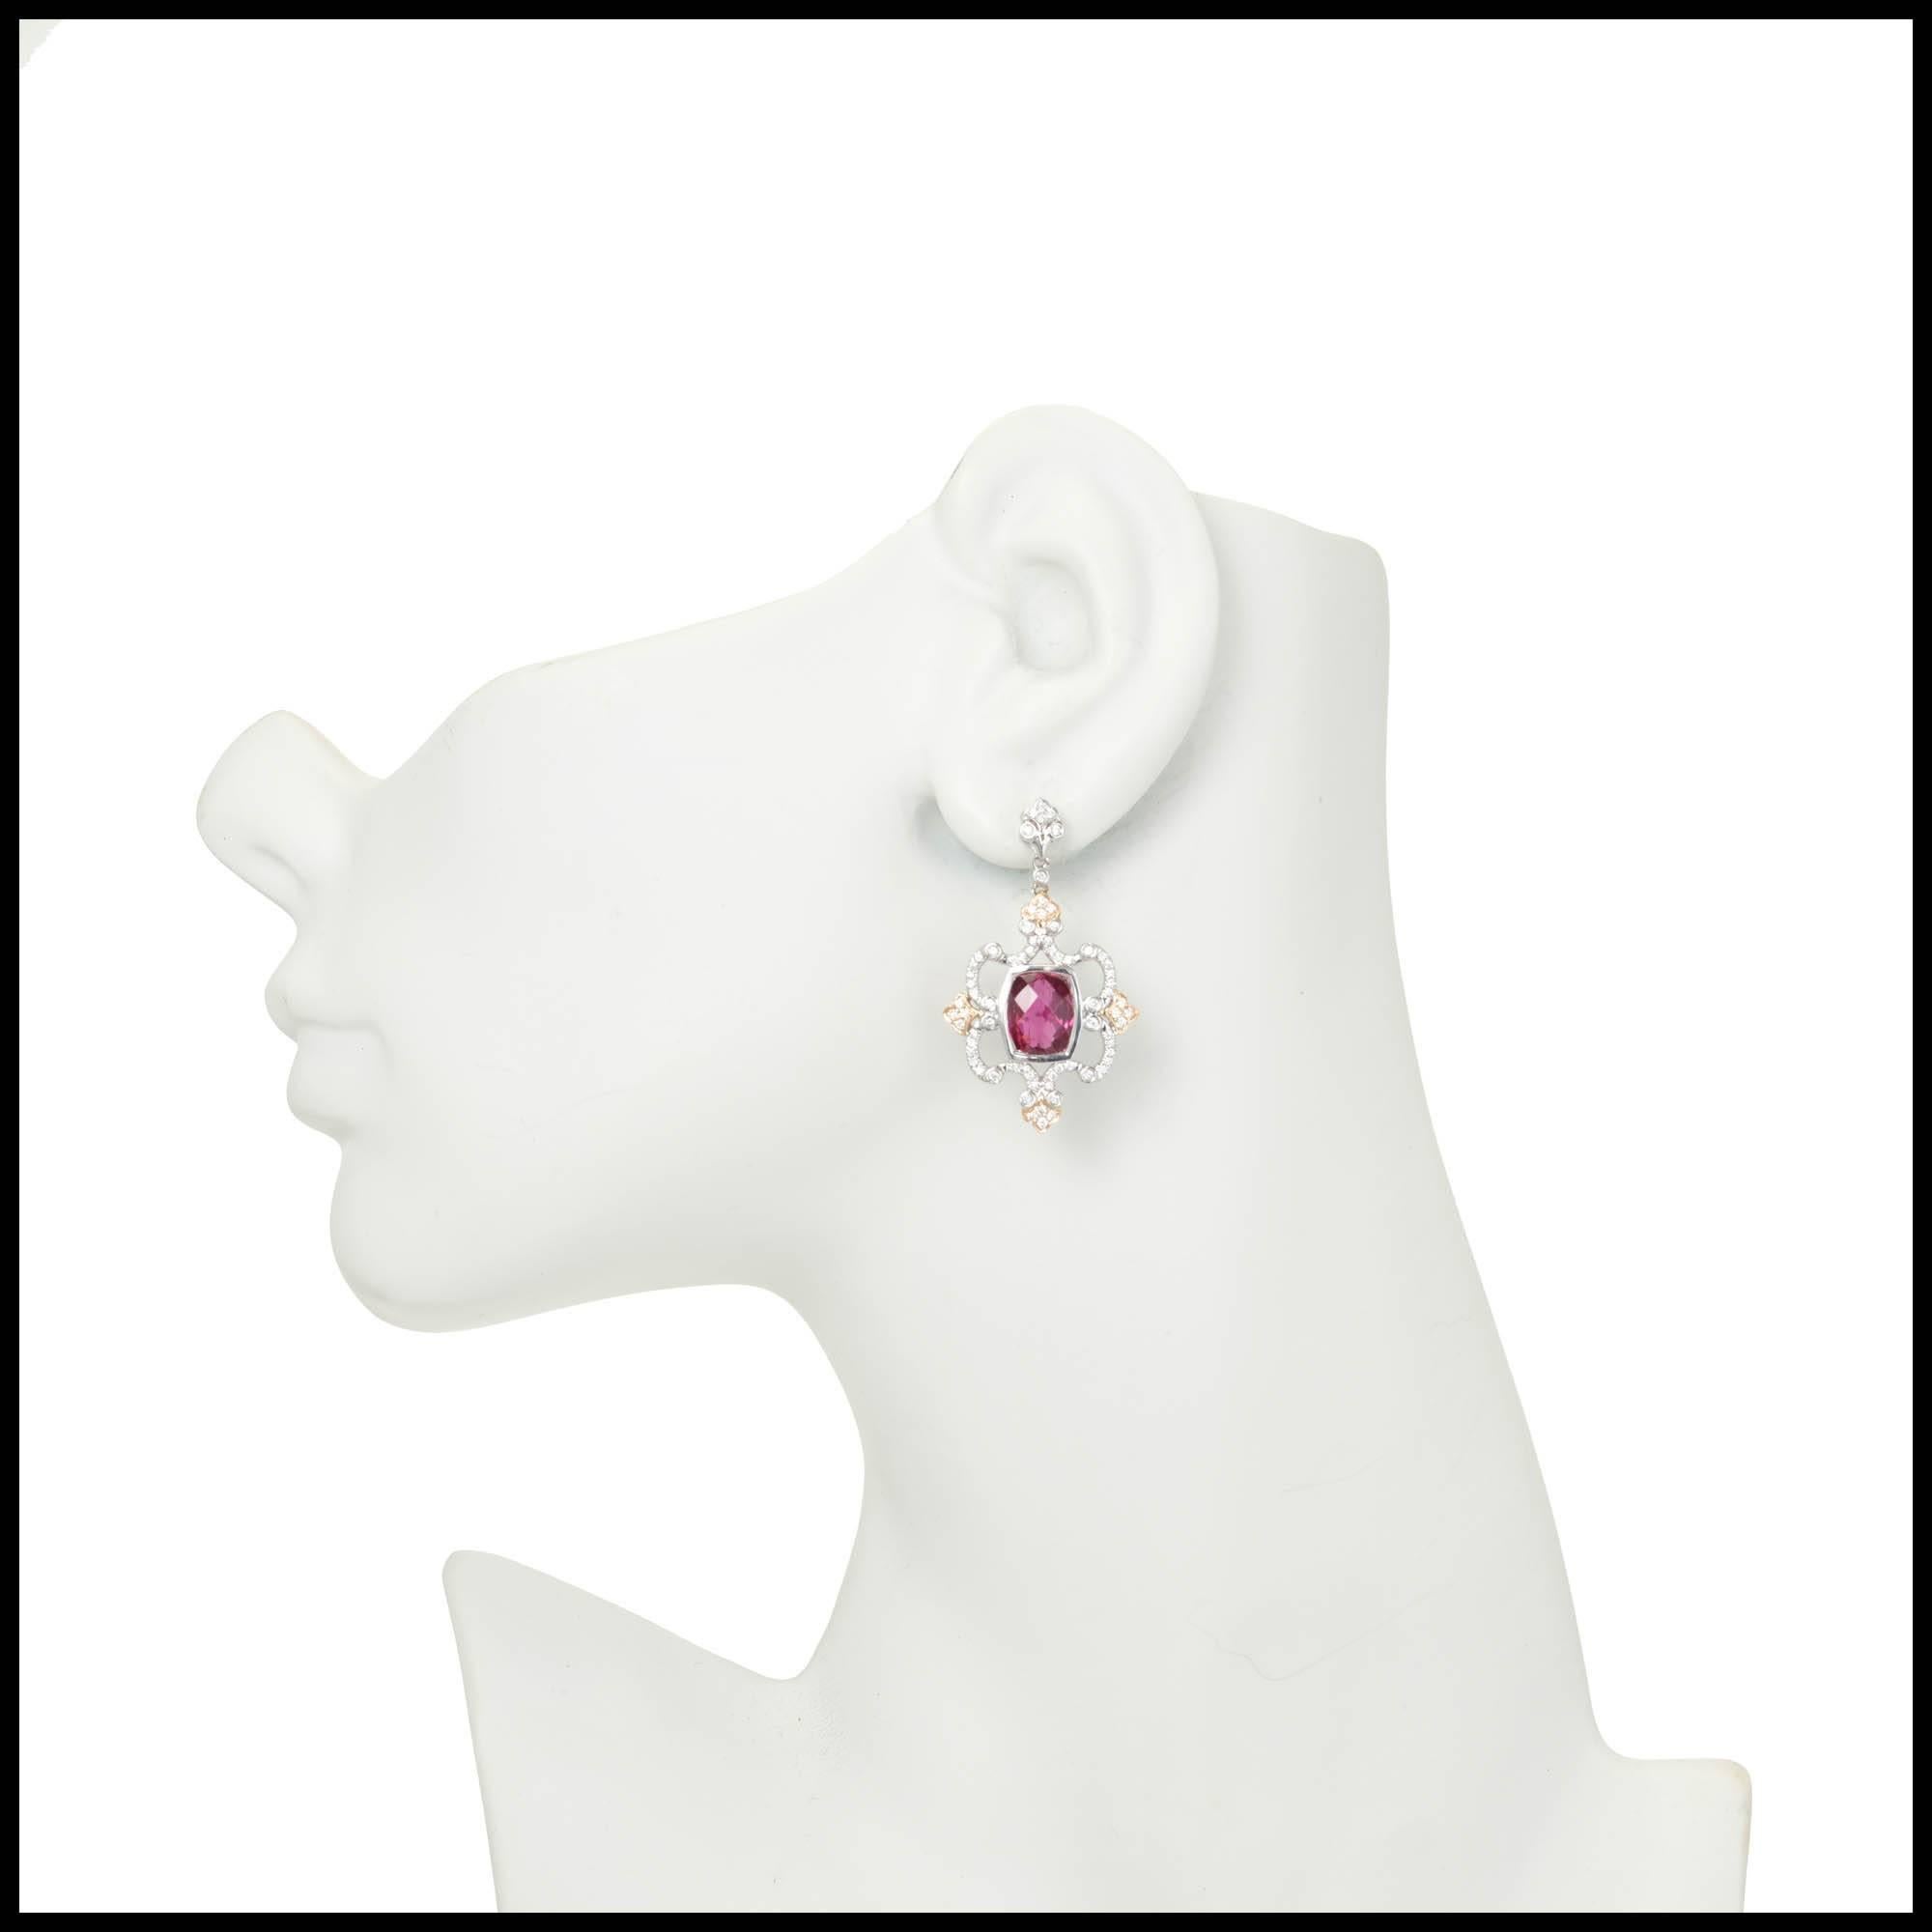  Charles Krypell rose and white 18k gold dangle earrings with pink Tourmaline and fine white full cut diamonds.

Stamped: C. Krypell
2 cushion pink Tourmaline 9.5 x 7mm, approx. total weight 5.03cts
139 round full cut diamonds approx. total weight